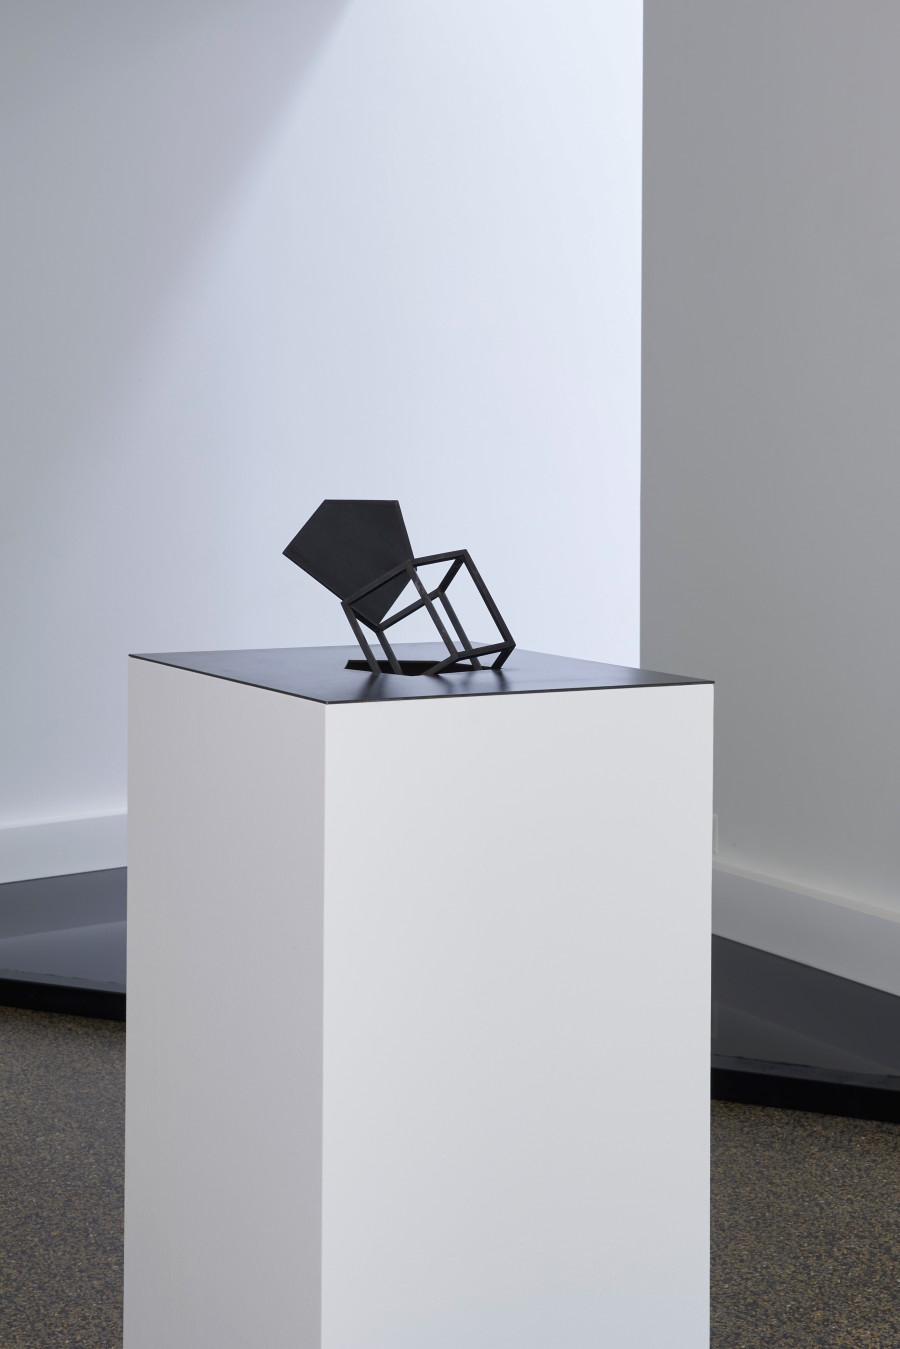 Untitled, 2023, Iron and pedestal, 115 x 60 x 50 cm, Unique. Photo: Philipp Hänger. Courtesy the artist and Wilde